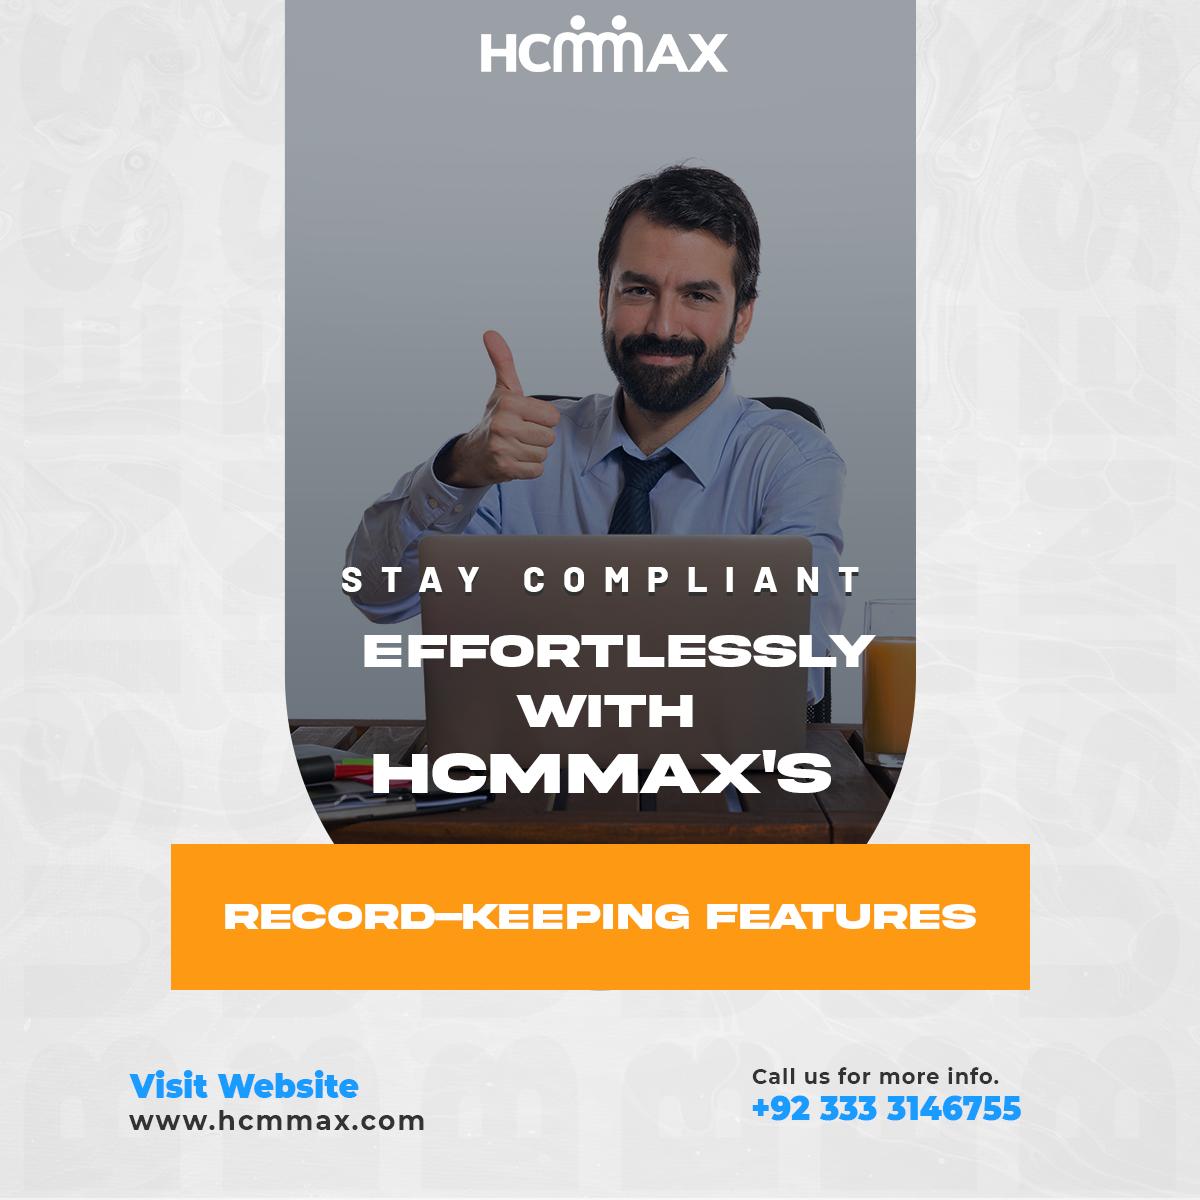 Effortlessly manage compliance and streamline record-keeping with HCMMAX – your ultimate Human Capital Management solution

Contact us
:
+92 3337571988 
+92 333 7180179

 #RecruitmentStrategies #TopTalent
#WorkplaceSuccess
#hr #software #cloudhrsoftware #payrollsoftware